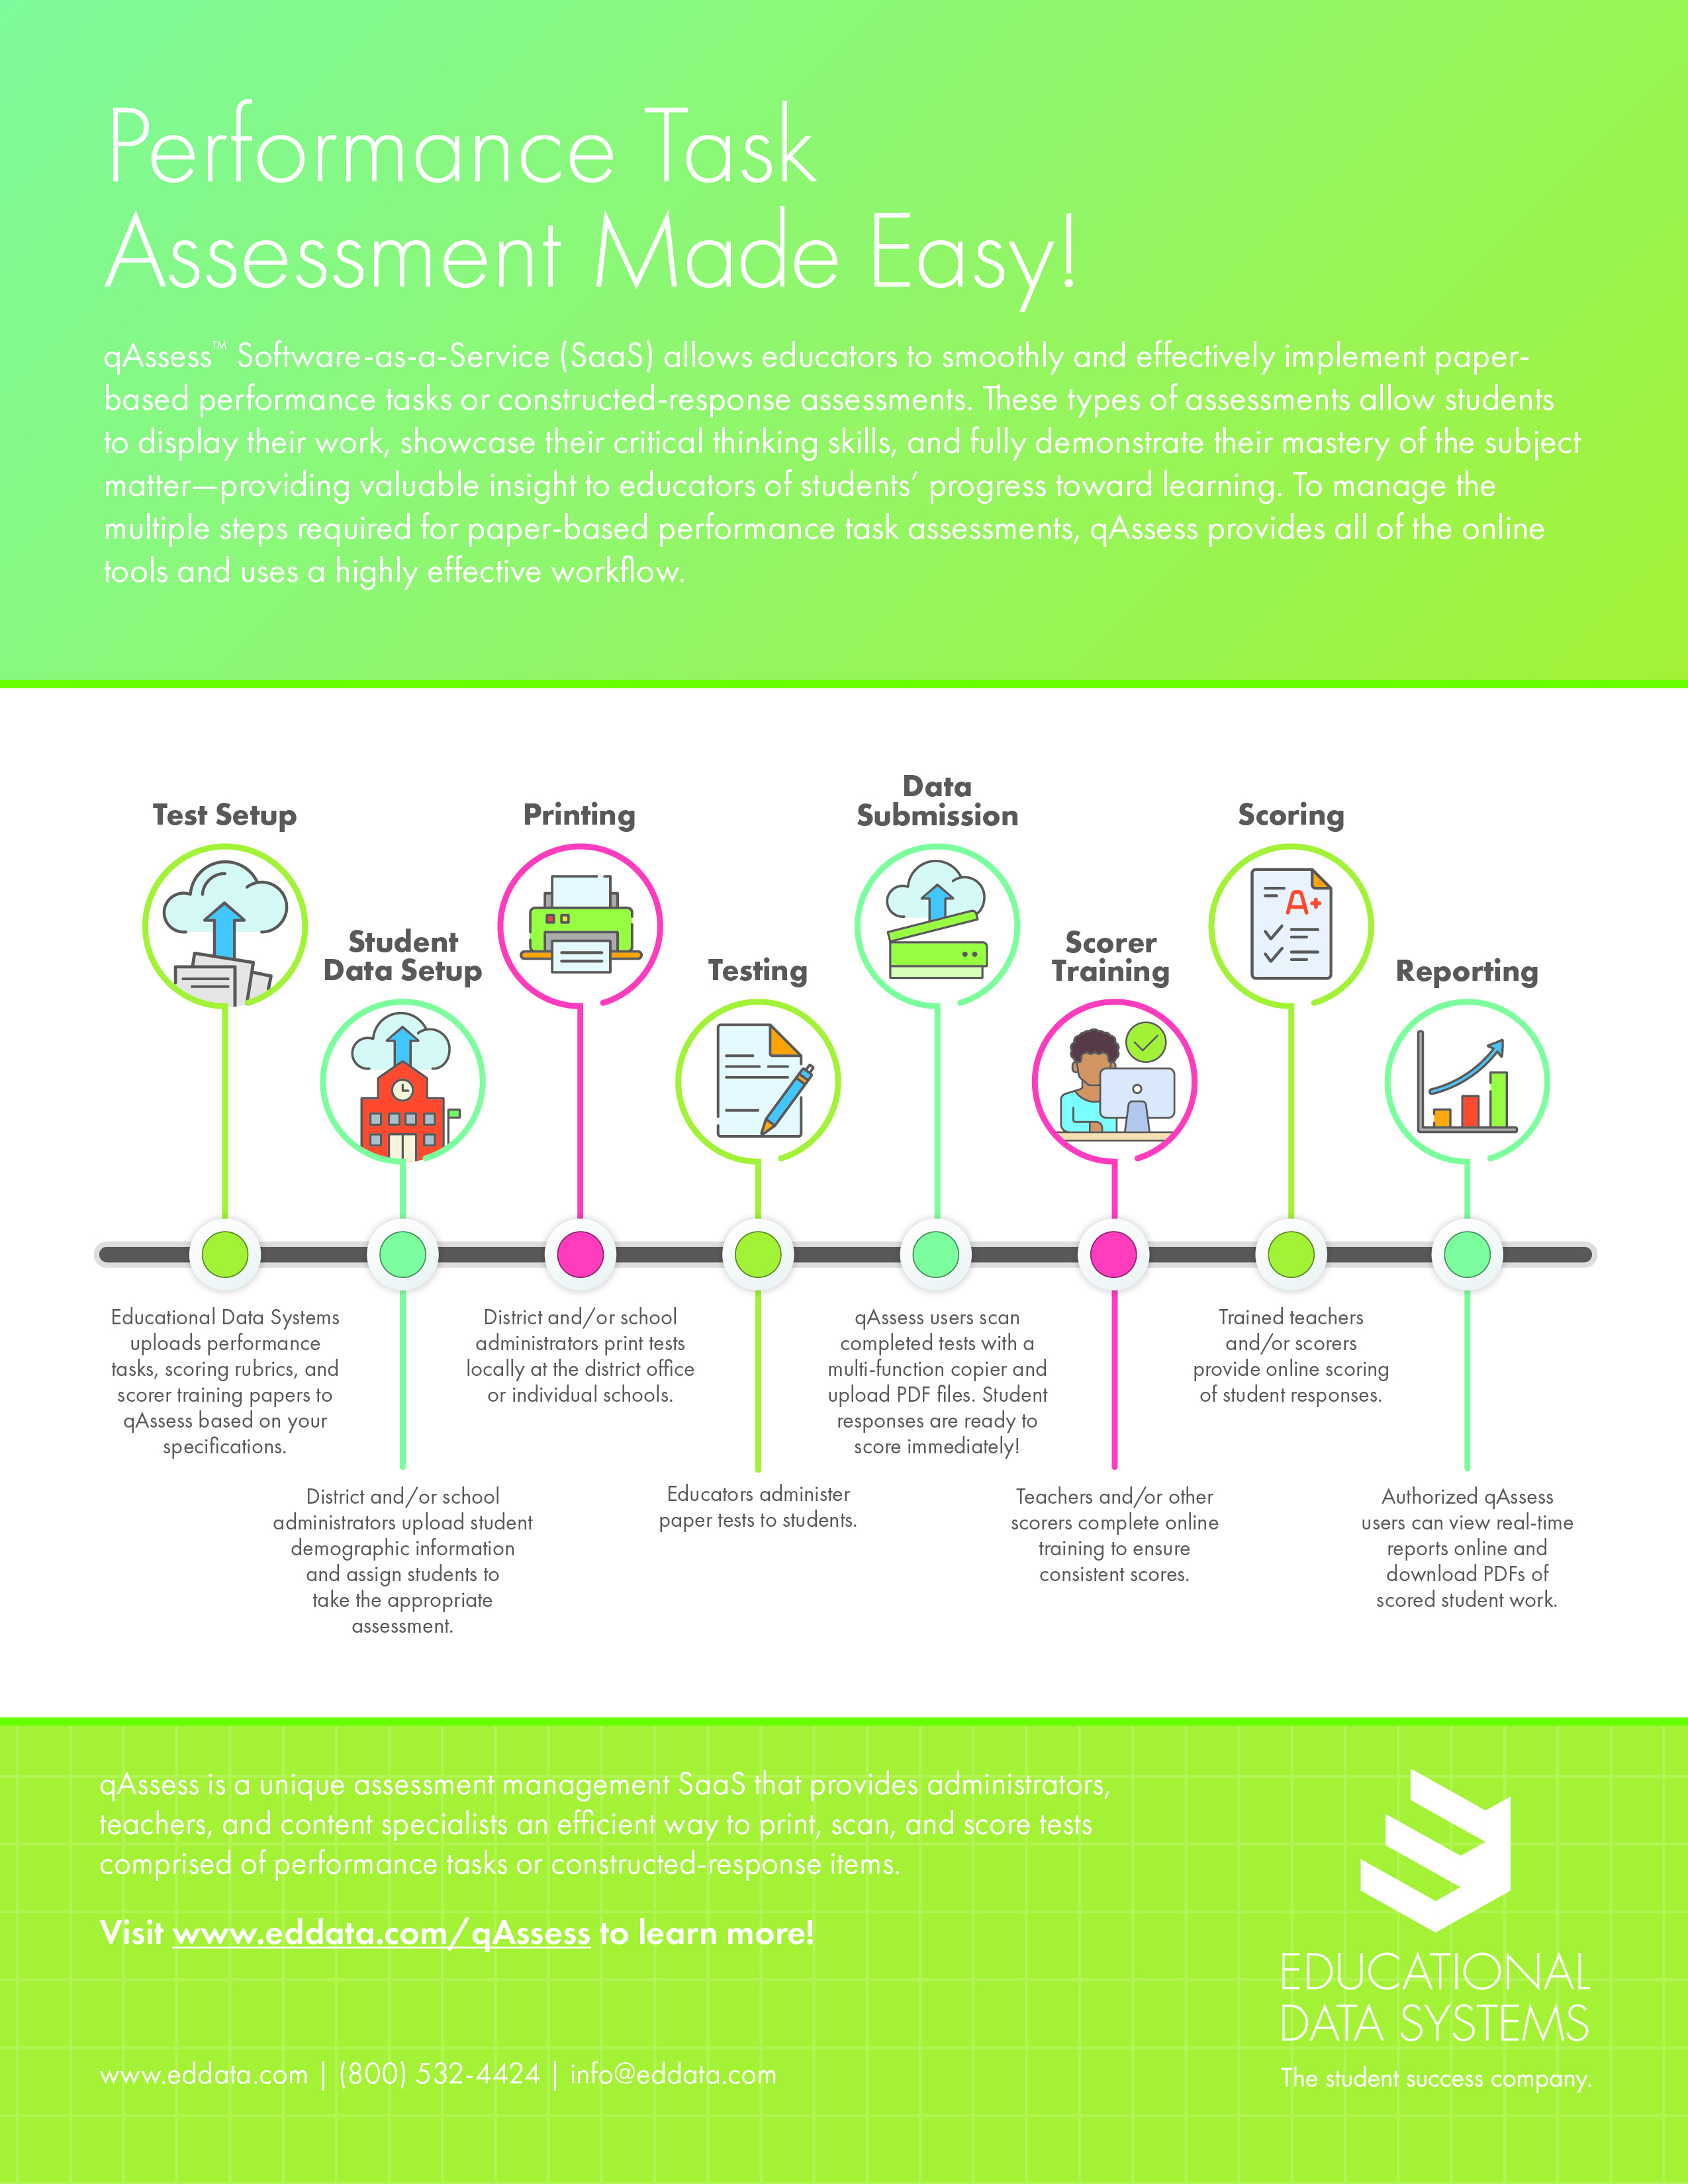 Get the Performance Task Assessment Made Easy Infographic